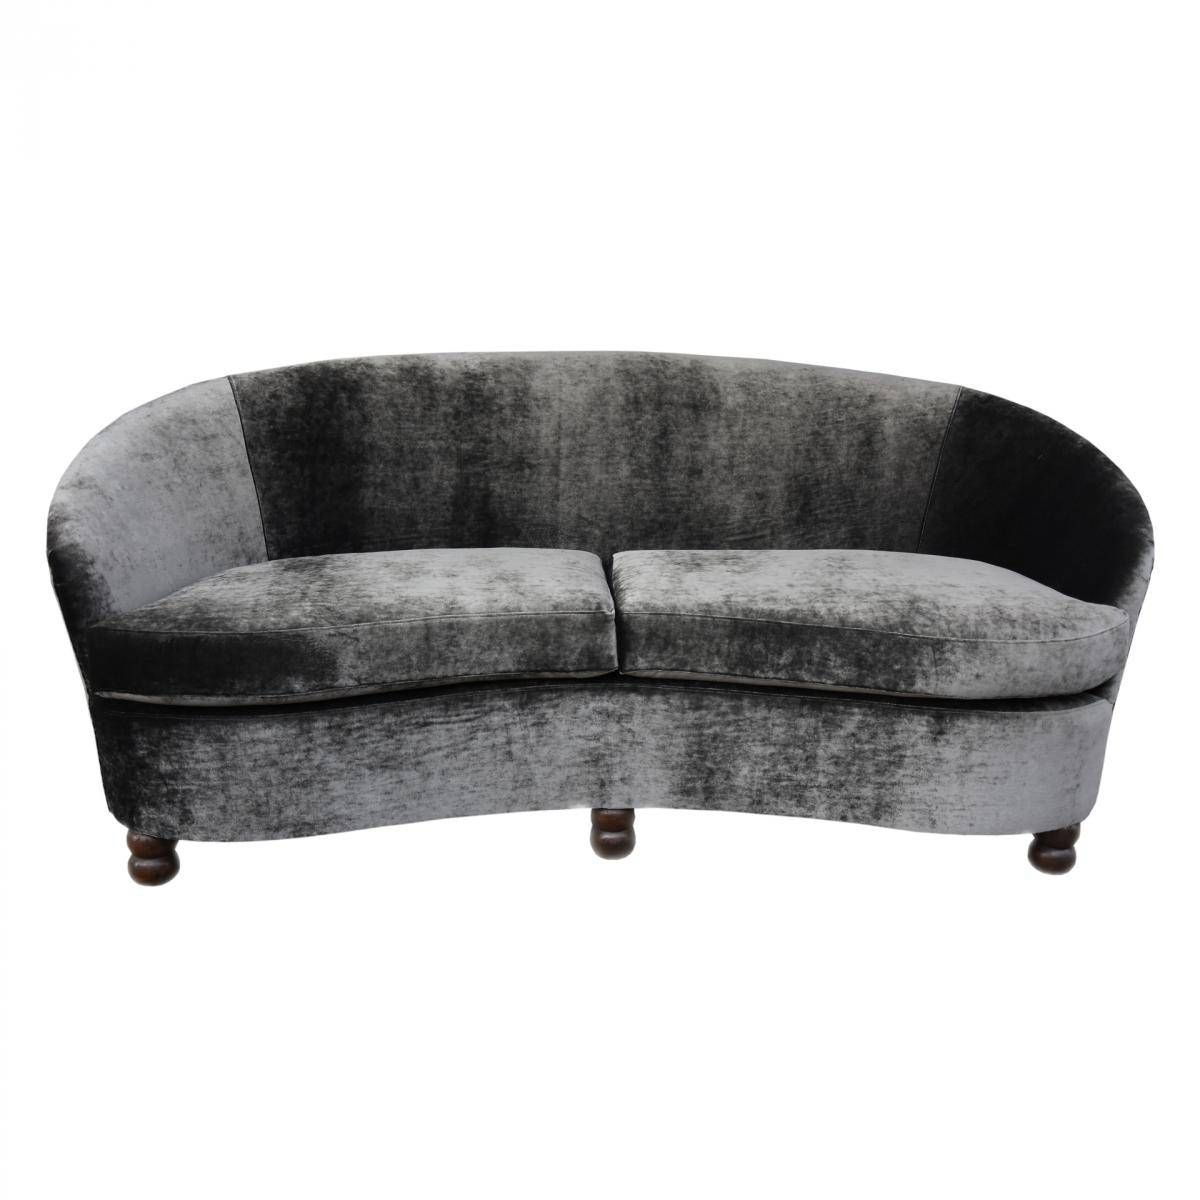 Vintage Italian Curved Sofa For Sale At Pamono Within Circular Sofa Chairs (View 21 of 30)